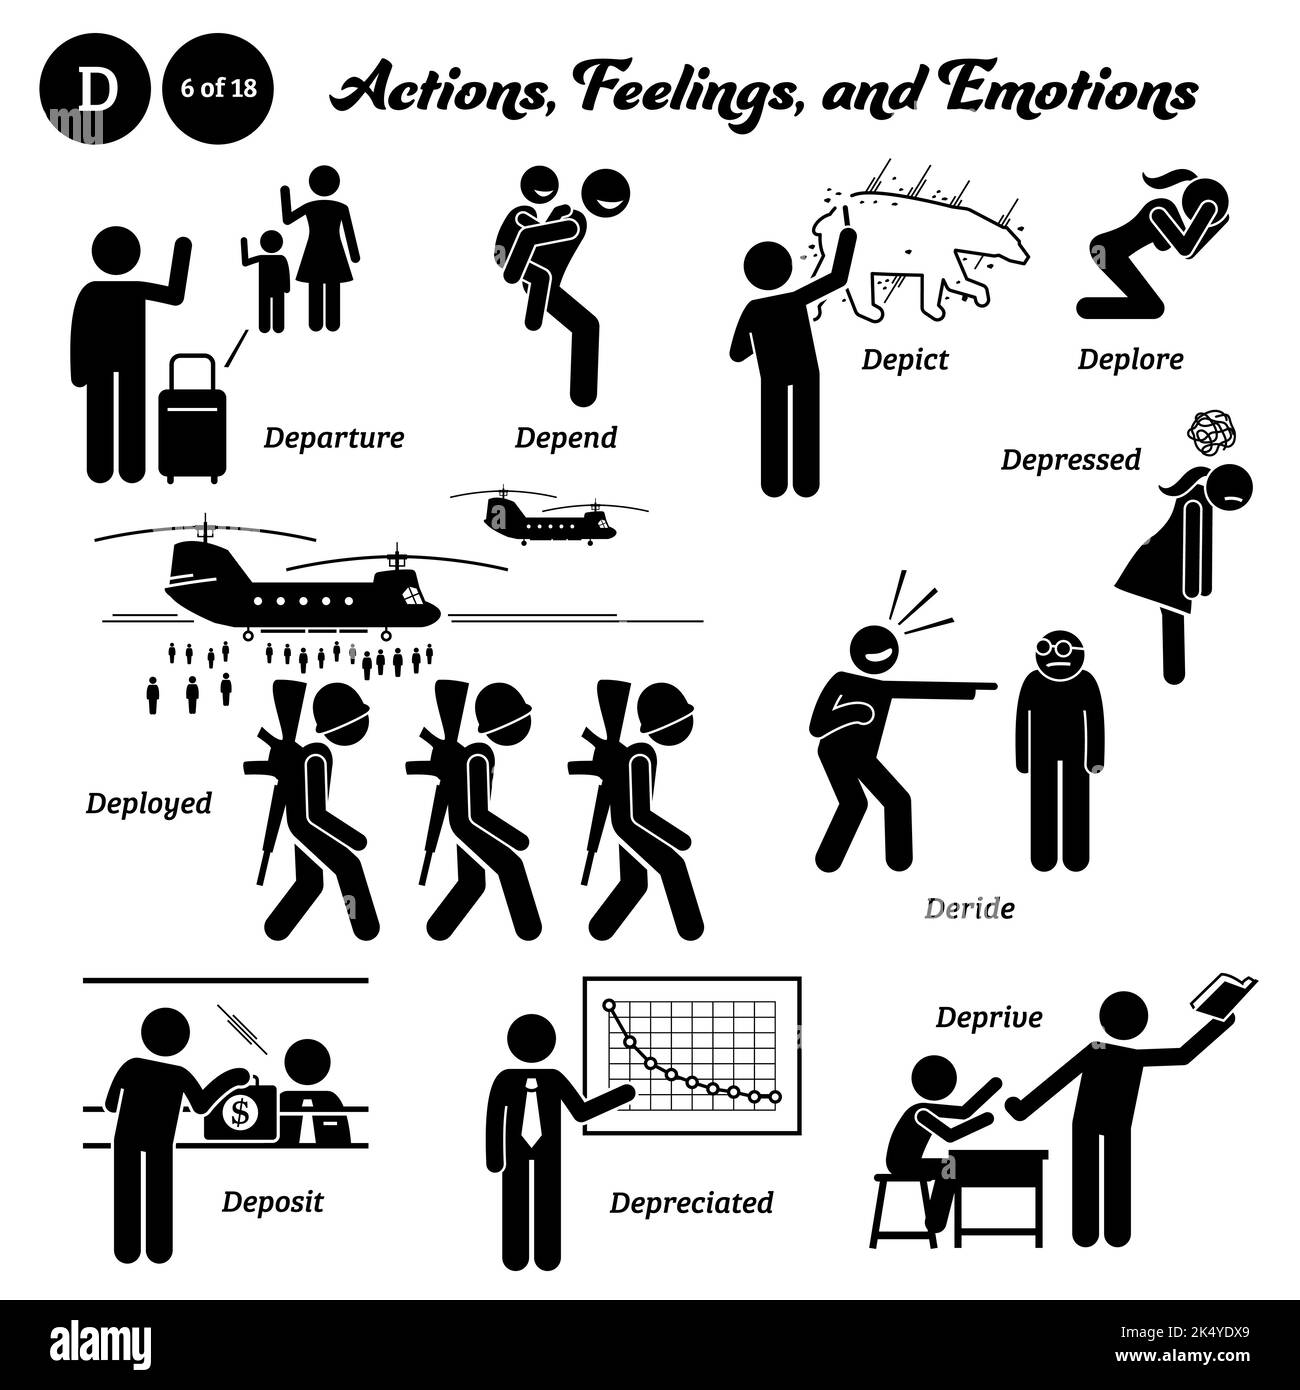 Stick figure human people man action, feelings, and emotions icons alphabet D. Departure, depend, depict, deplore, deployed, deride, depressed, deposi Stock Vector